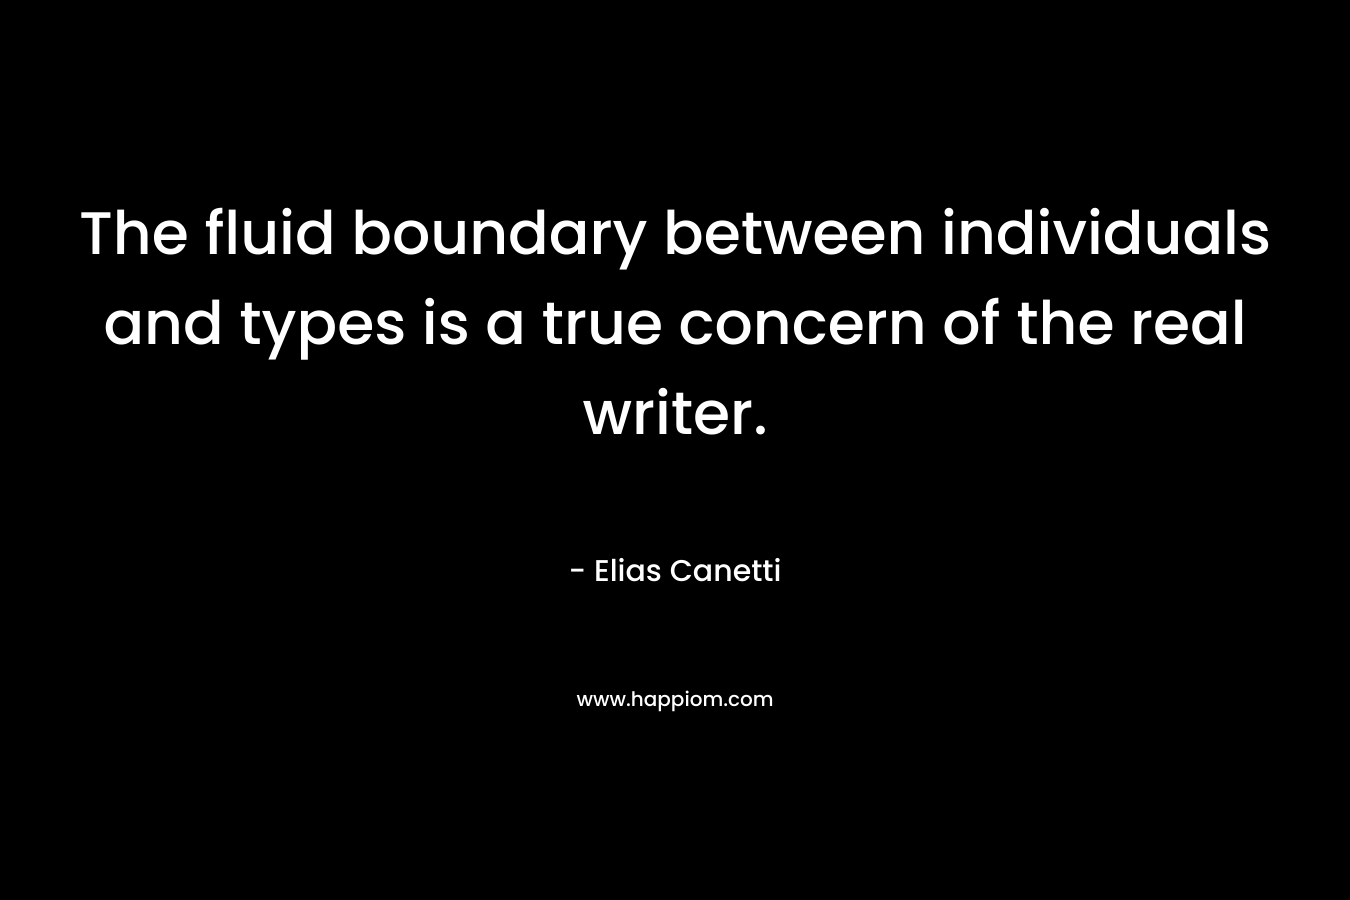 The fluid boundary between individuals and types is a true concern of the real writer. – Elias Canetti